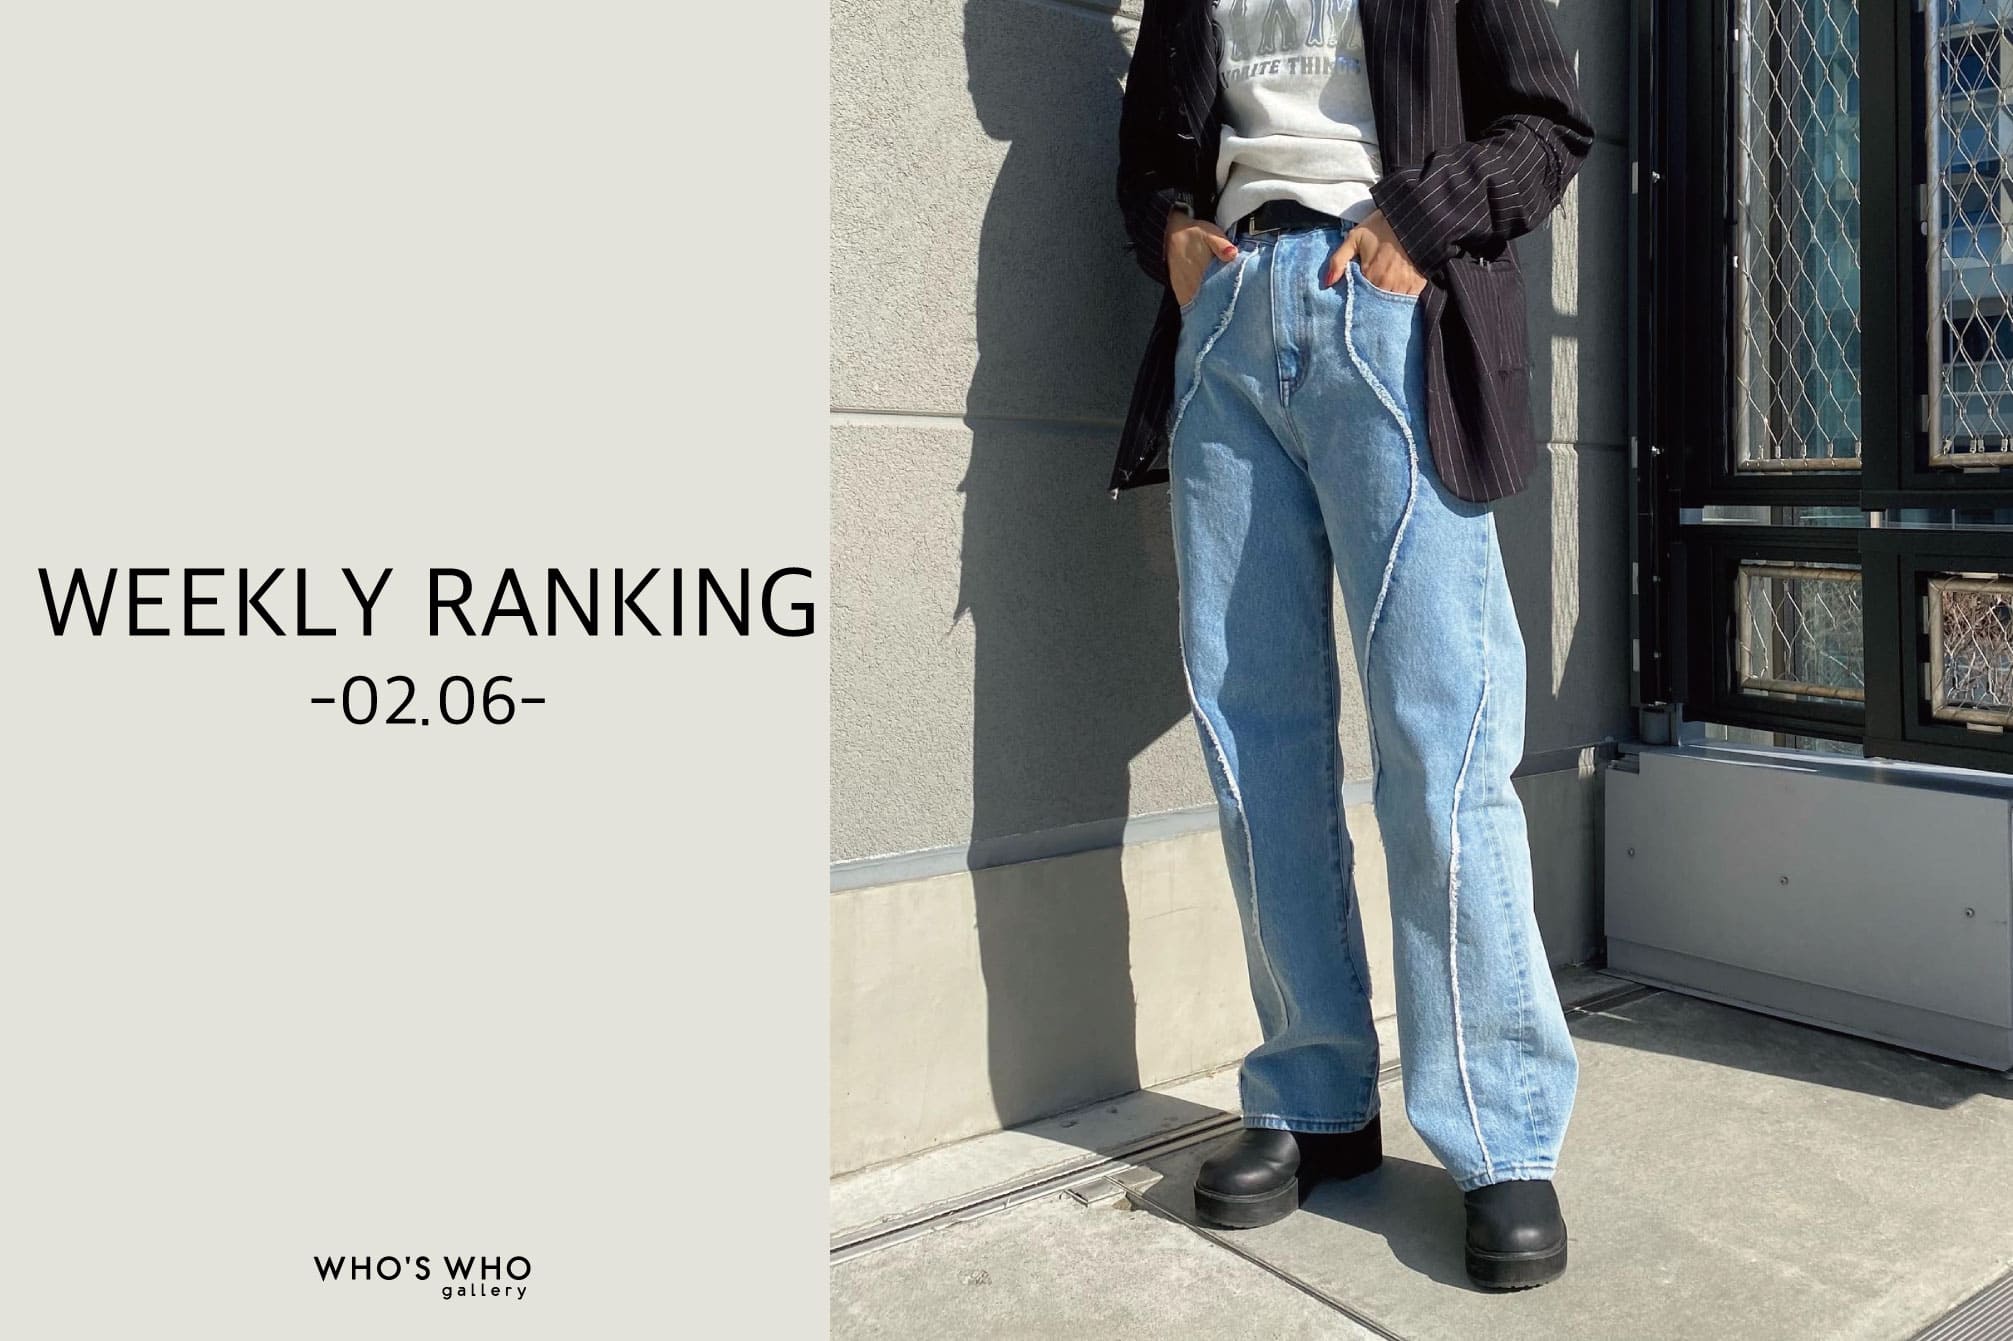 WHO’S WHO gallery 【WEEKLY RANKIN -02.06-】